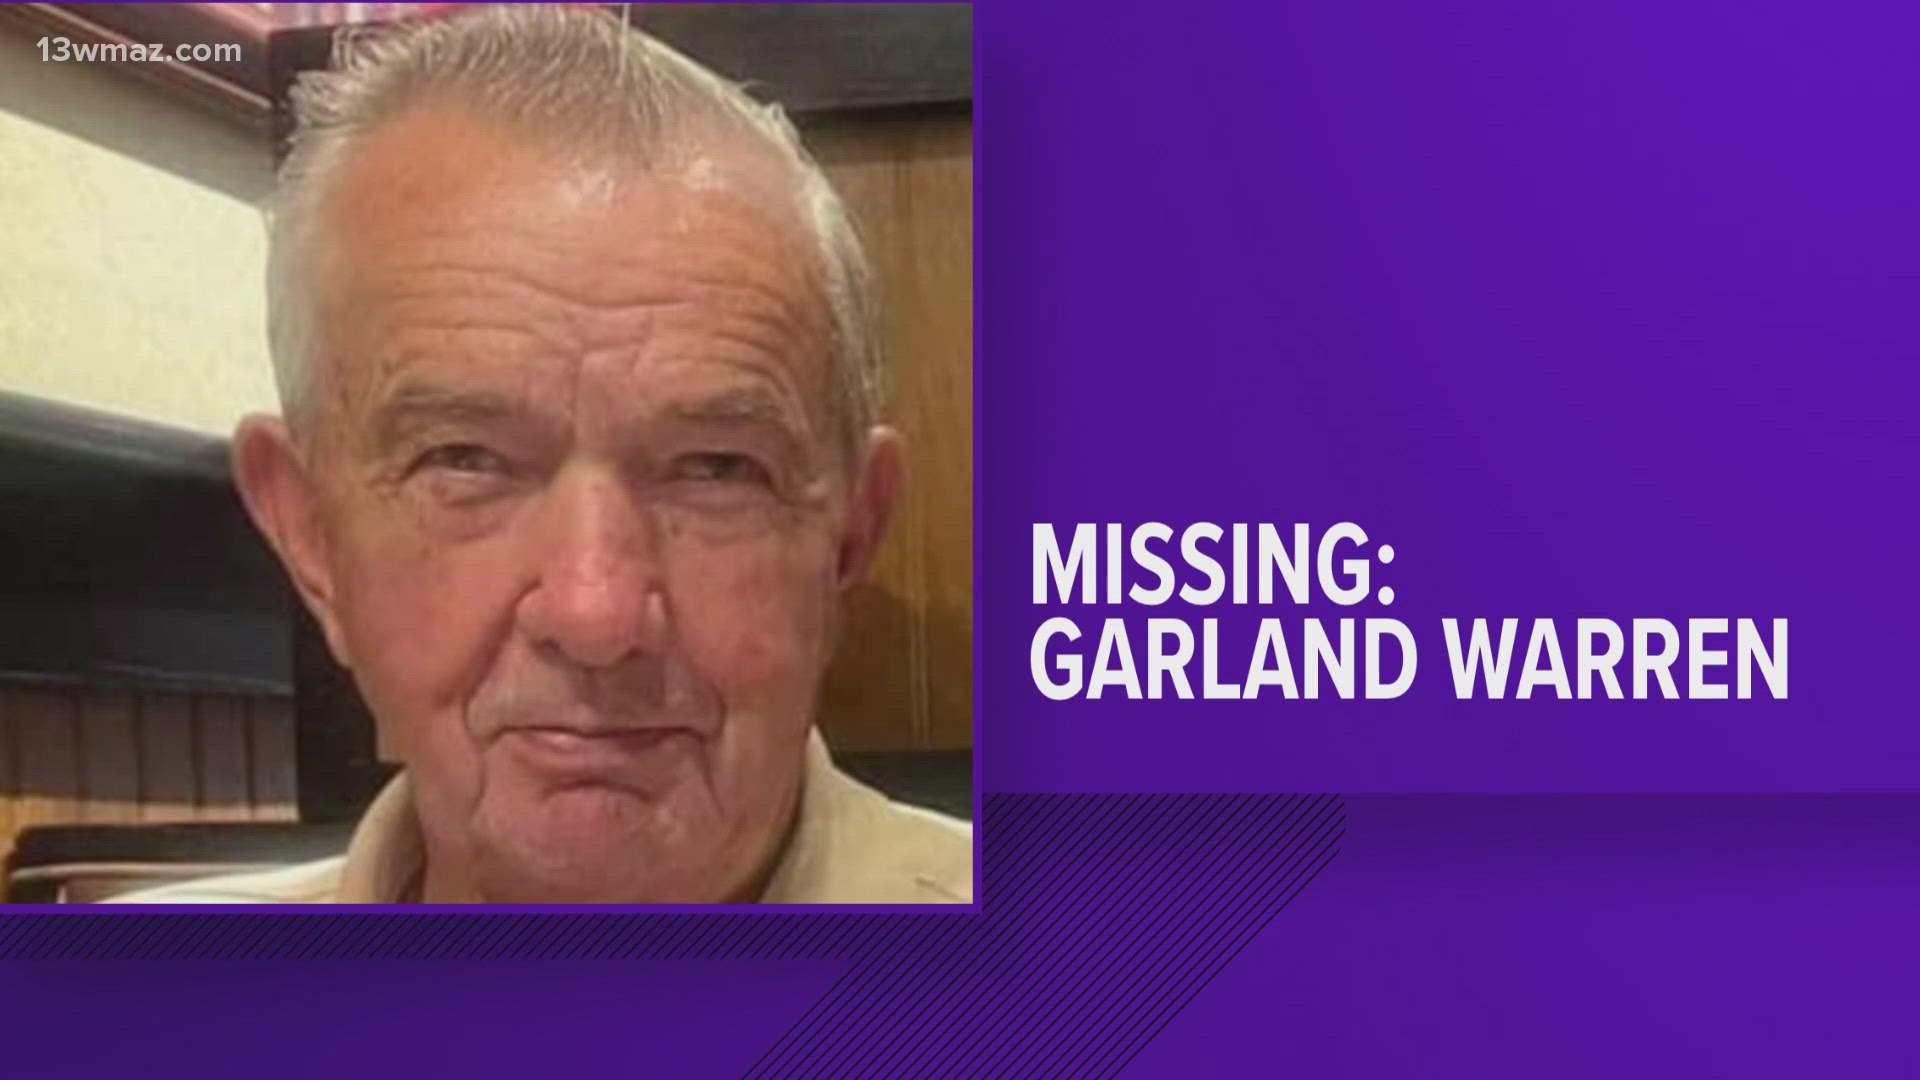 Garland Warren went missing around  3 p.m. and was most recently seen in Fort Valley and Twiggs County on Highway 96